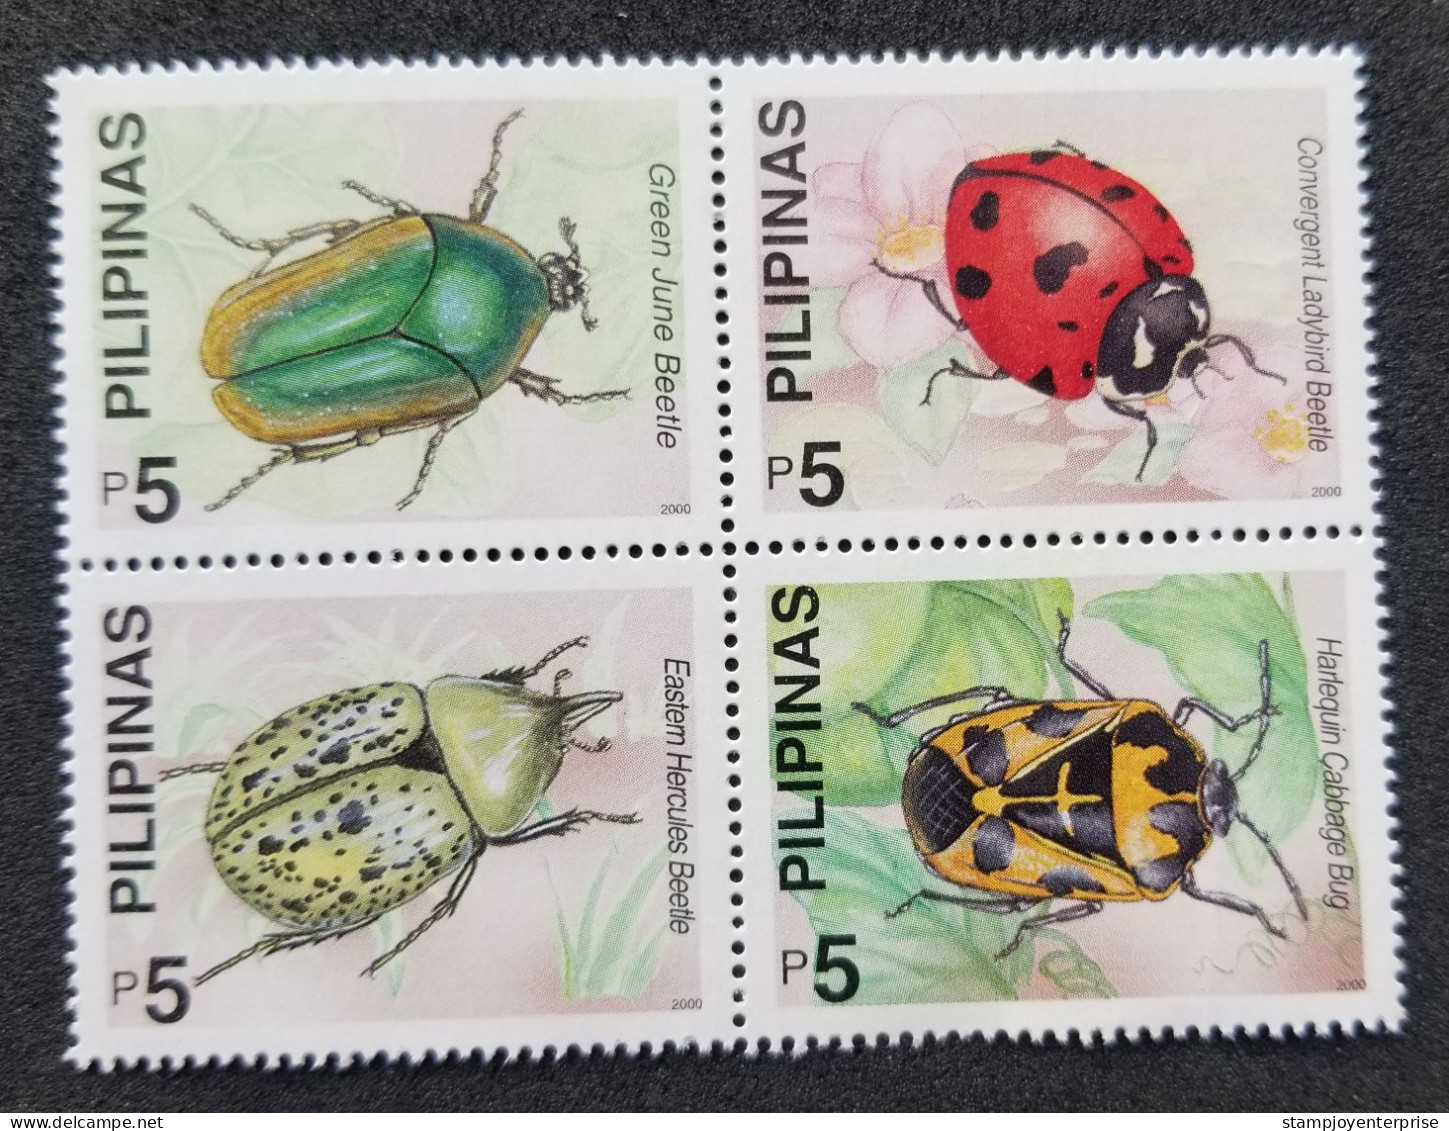 Philippines Insects 2000 Beetles Bug Ladybird Insect Beetle (stamp) MNH - Filippine